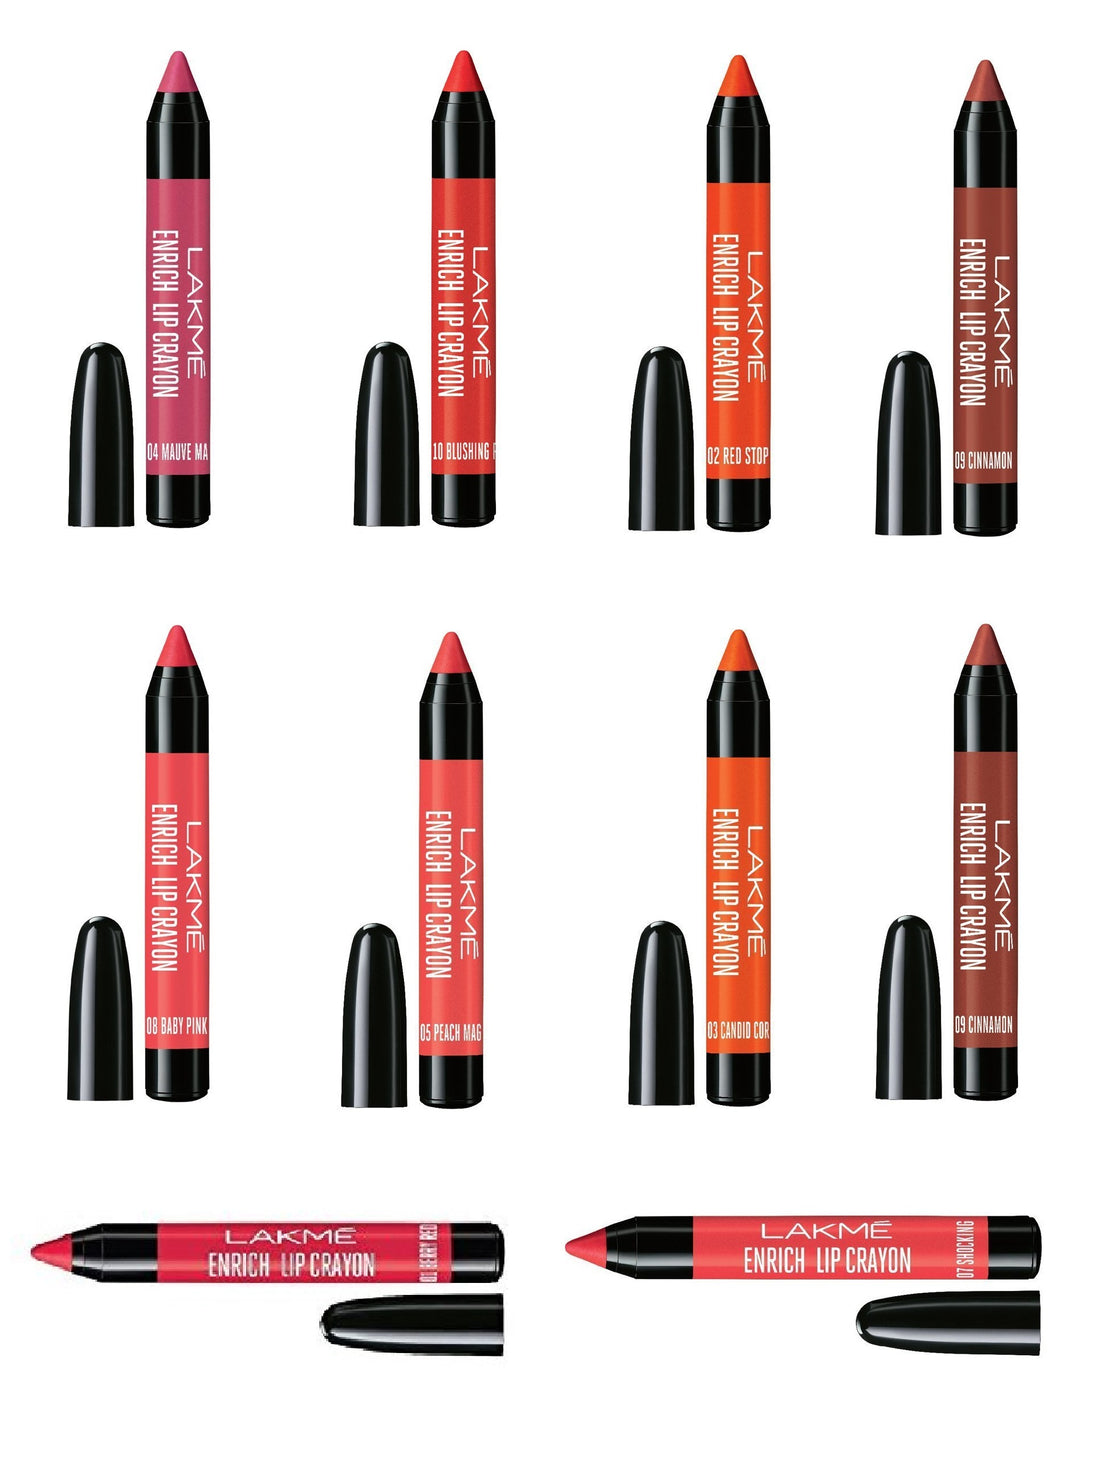 Most Affordable lip crayon in India